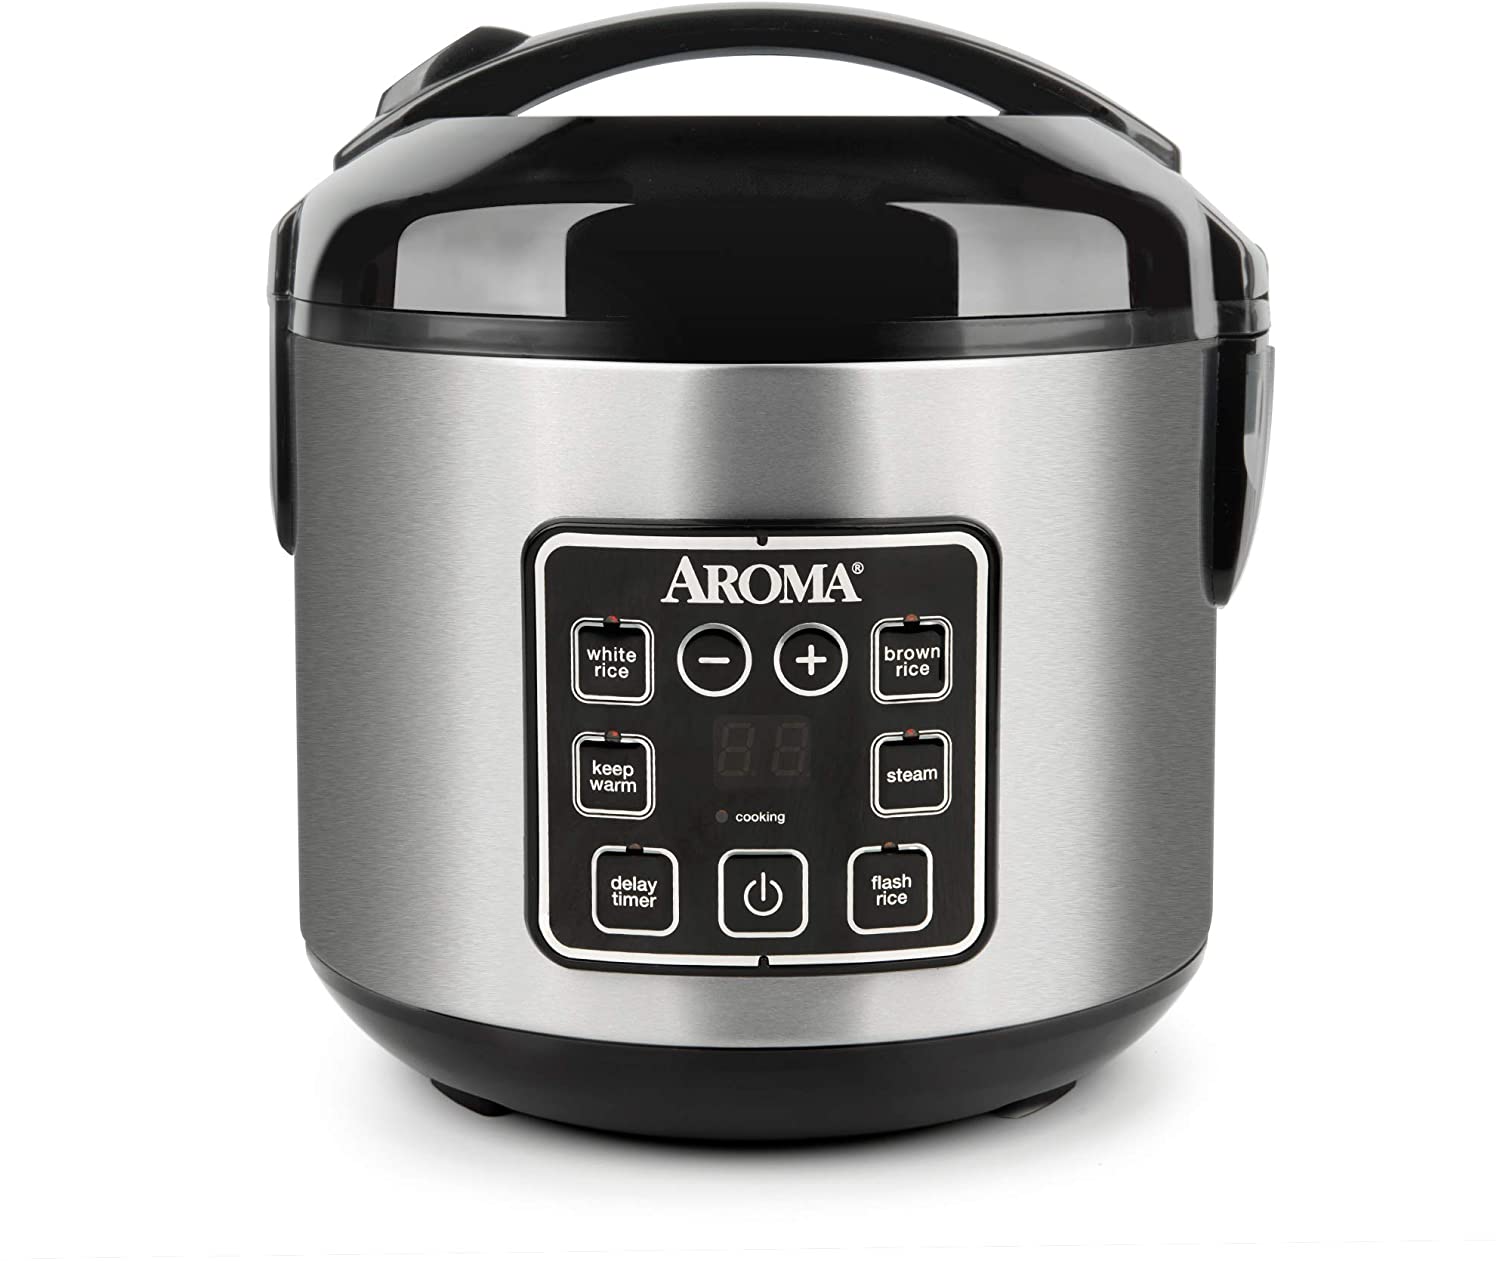 https://www.dontwasteyourmoney.com/wp-content/uploads/2019/08/aroma-housewares-arc-914sbd-2-8-cups-cooked-digital-cool-touch-rice-cooker-1.jpg